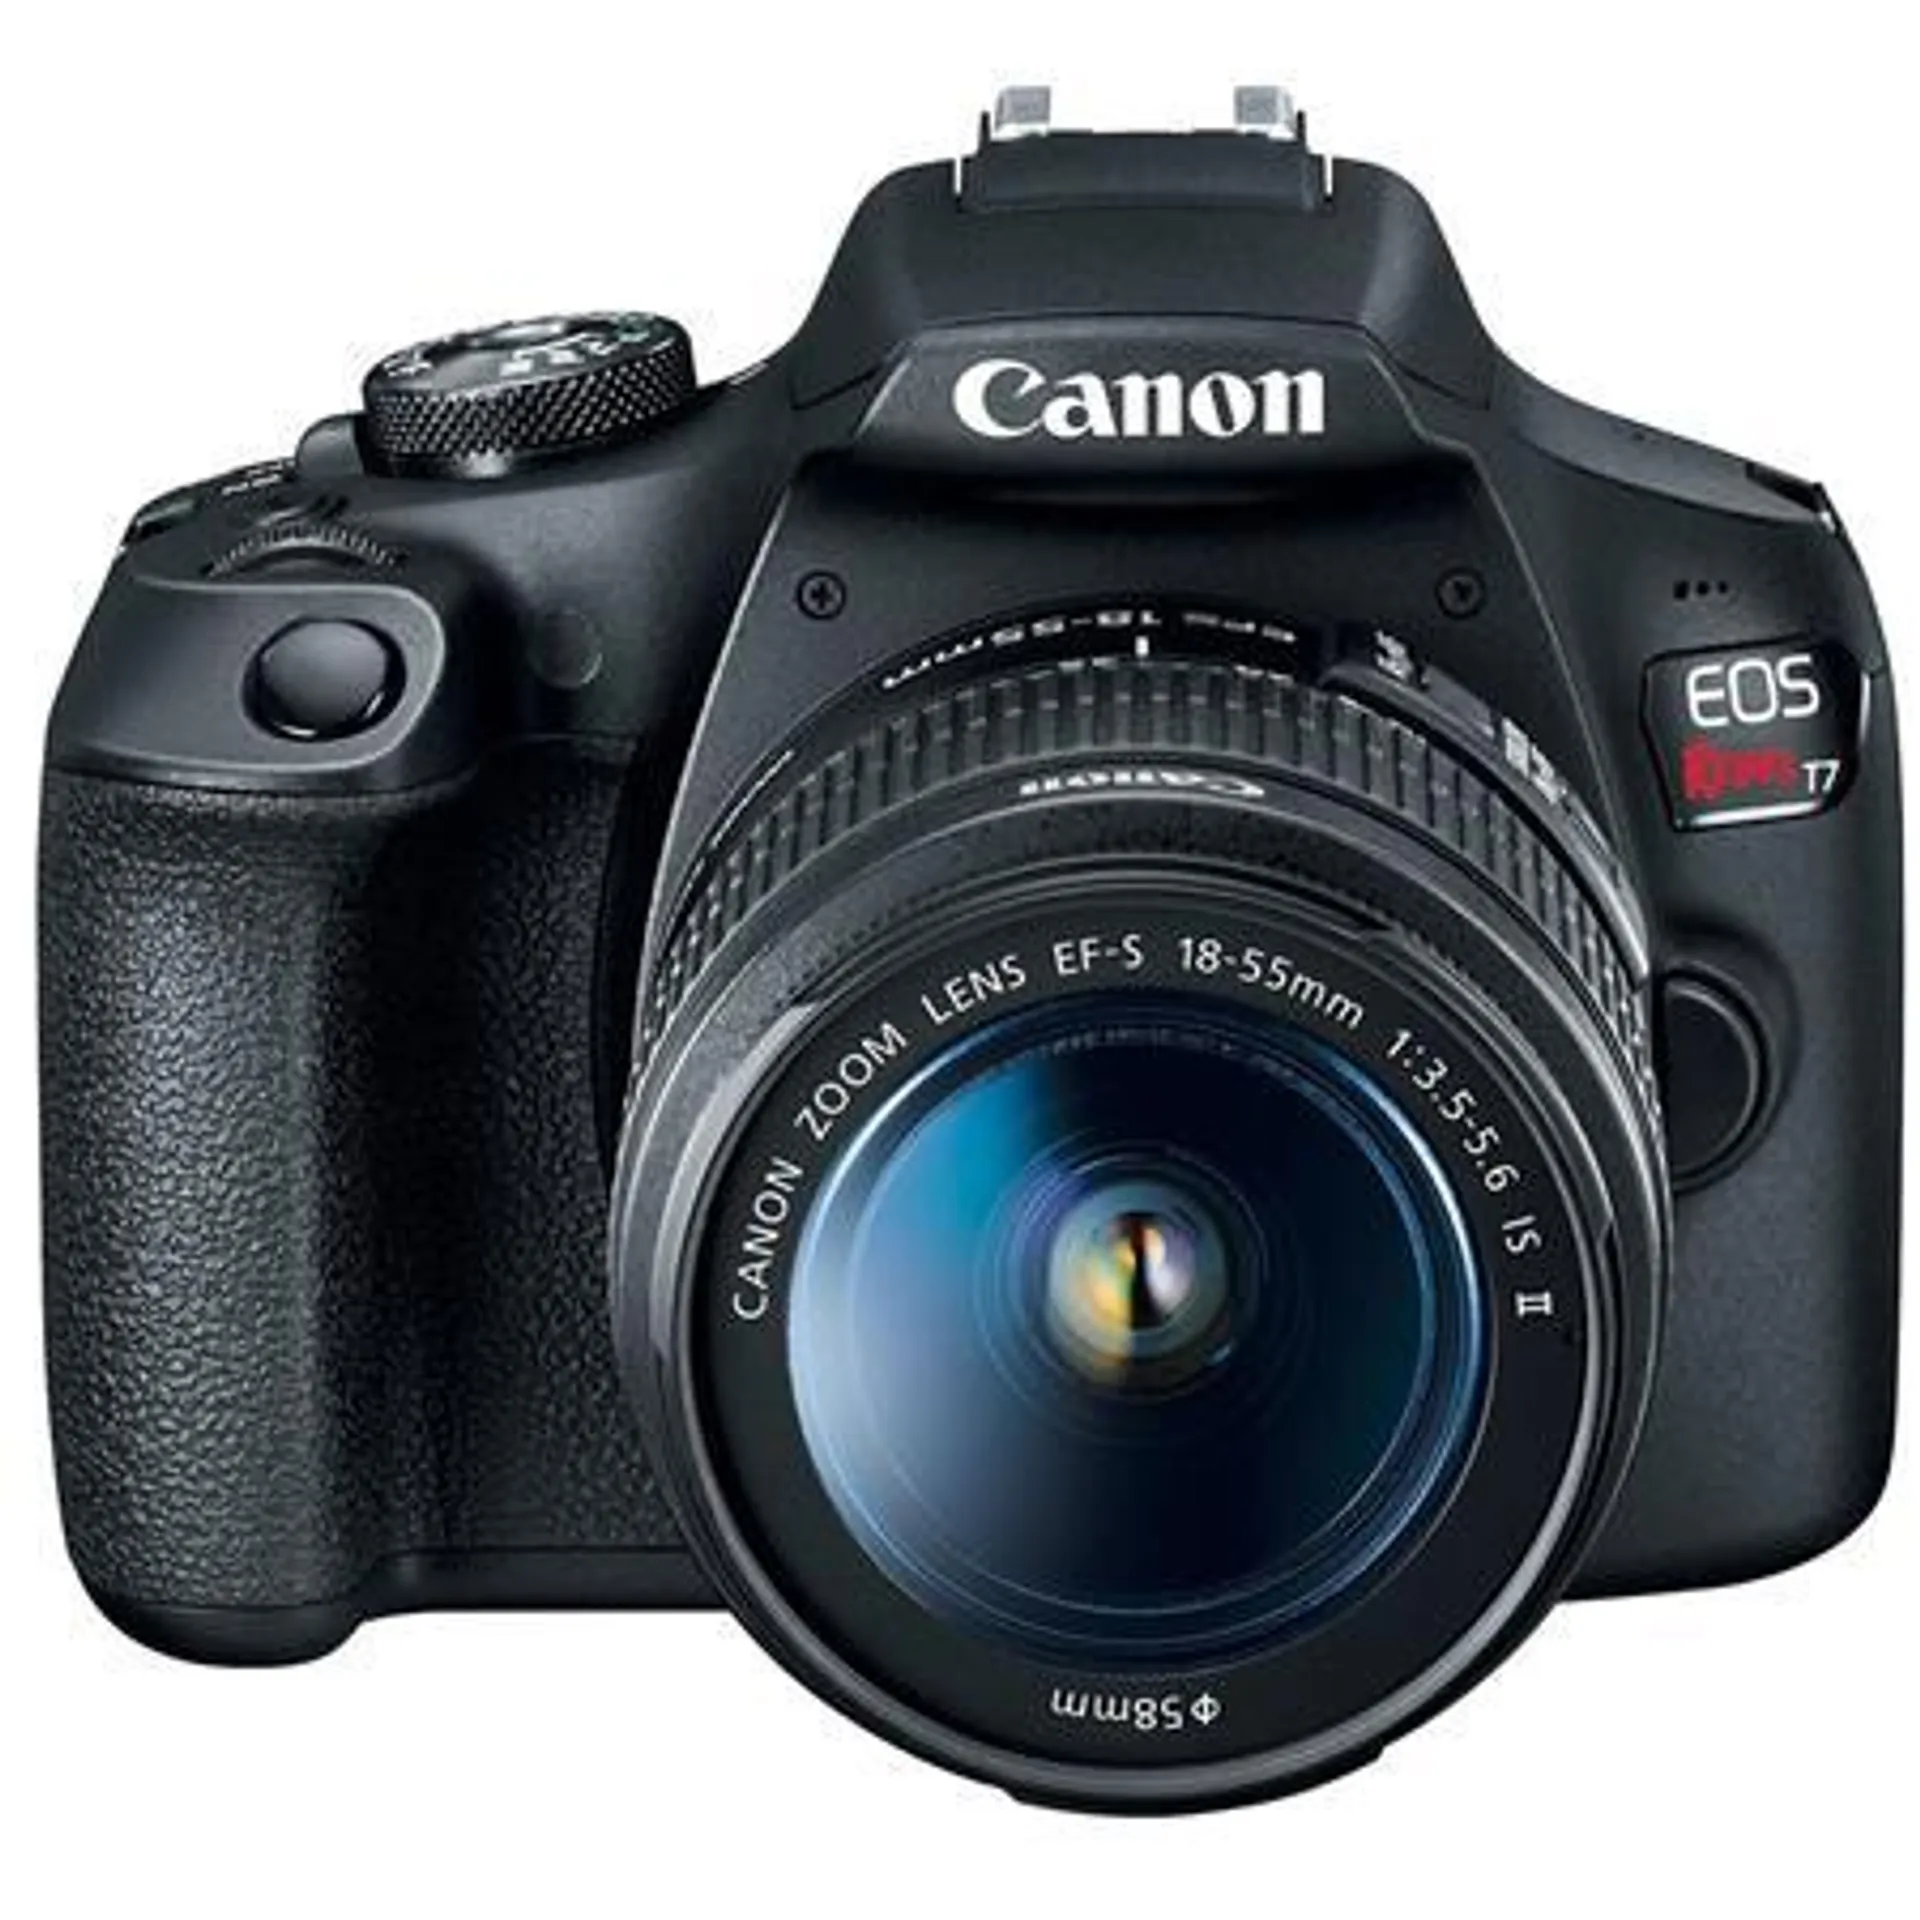 About Canon EOS Rebel T7